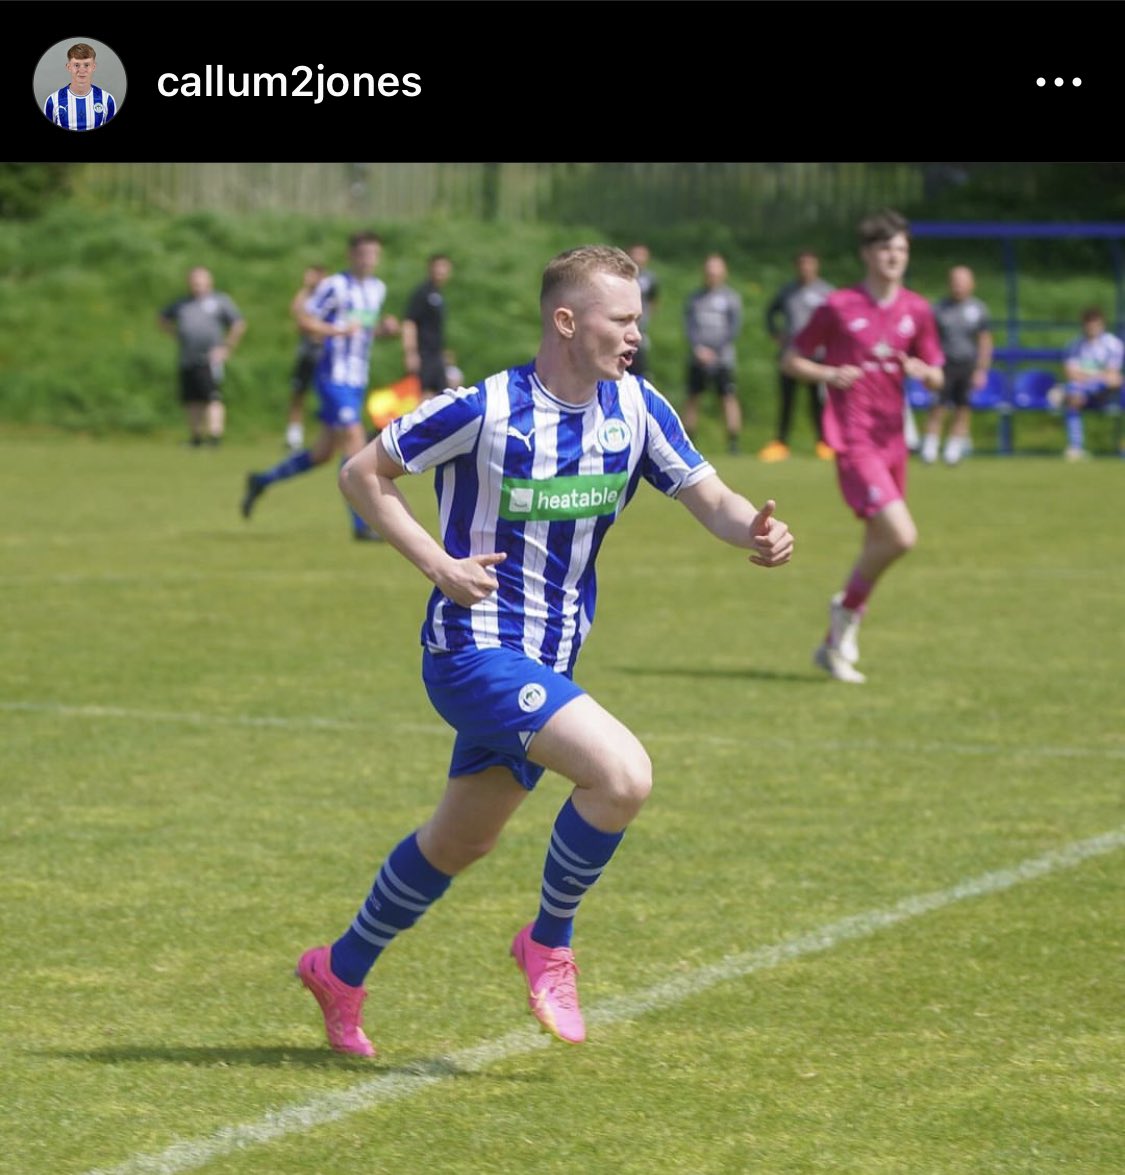 Wigan Athletic Under 18s Captain, Callum Jones, on Instagram 📸 “Unbelievable feeling being back on the pitch after a tough year 🤞🏼 thank you to everyone for their support throughout this season 💙” Jones recently recovered from Non-Hodgkin Lymphoma. Incredible story 🤍 #wafc